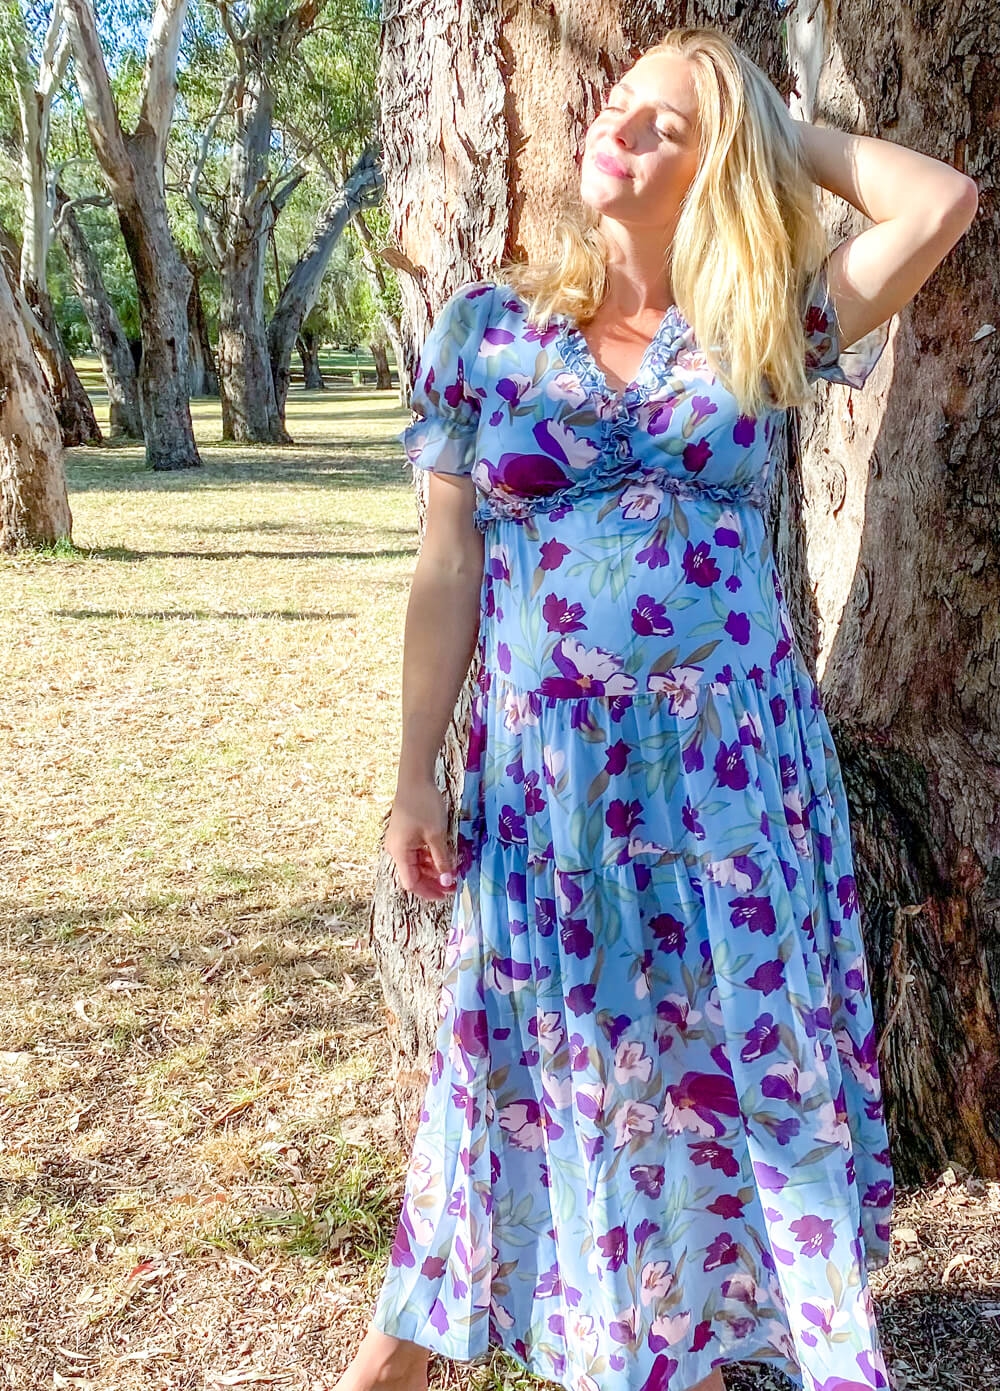 Lait & Co - Wanderlust Short Sleeve Maternity Maxi Gown in Blue/Purple Floral